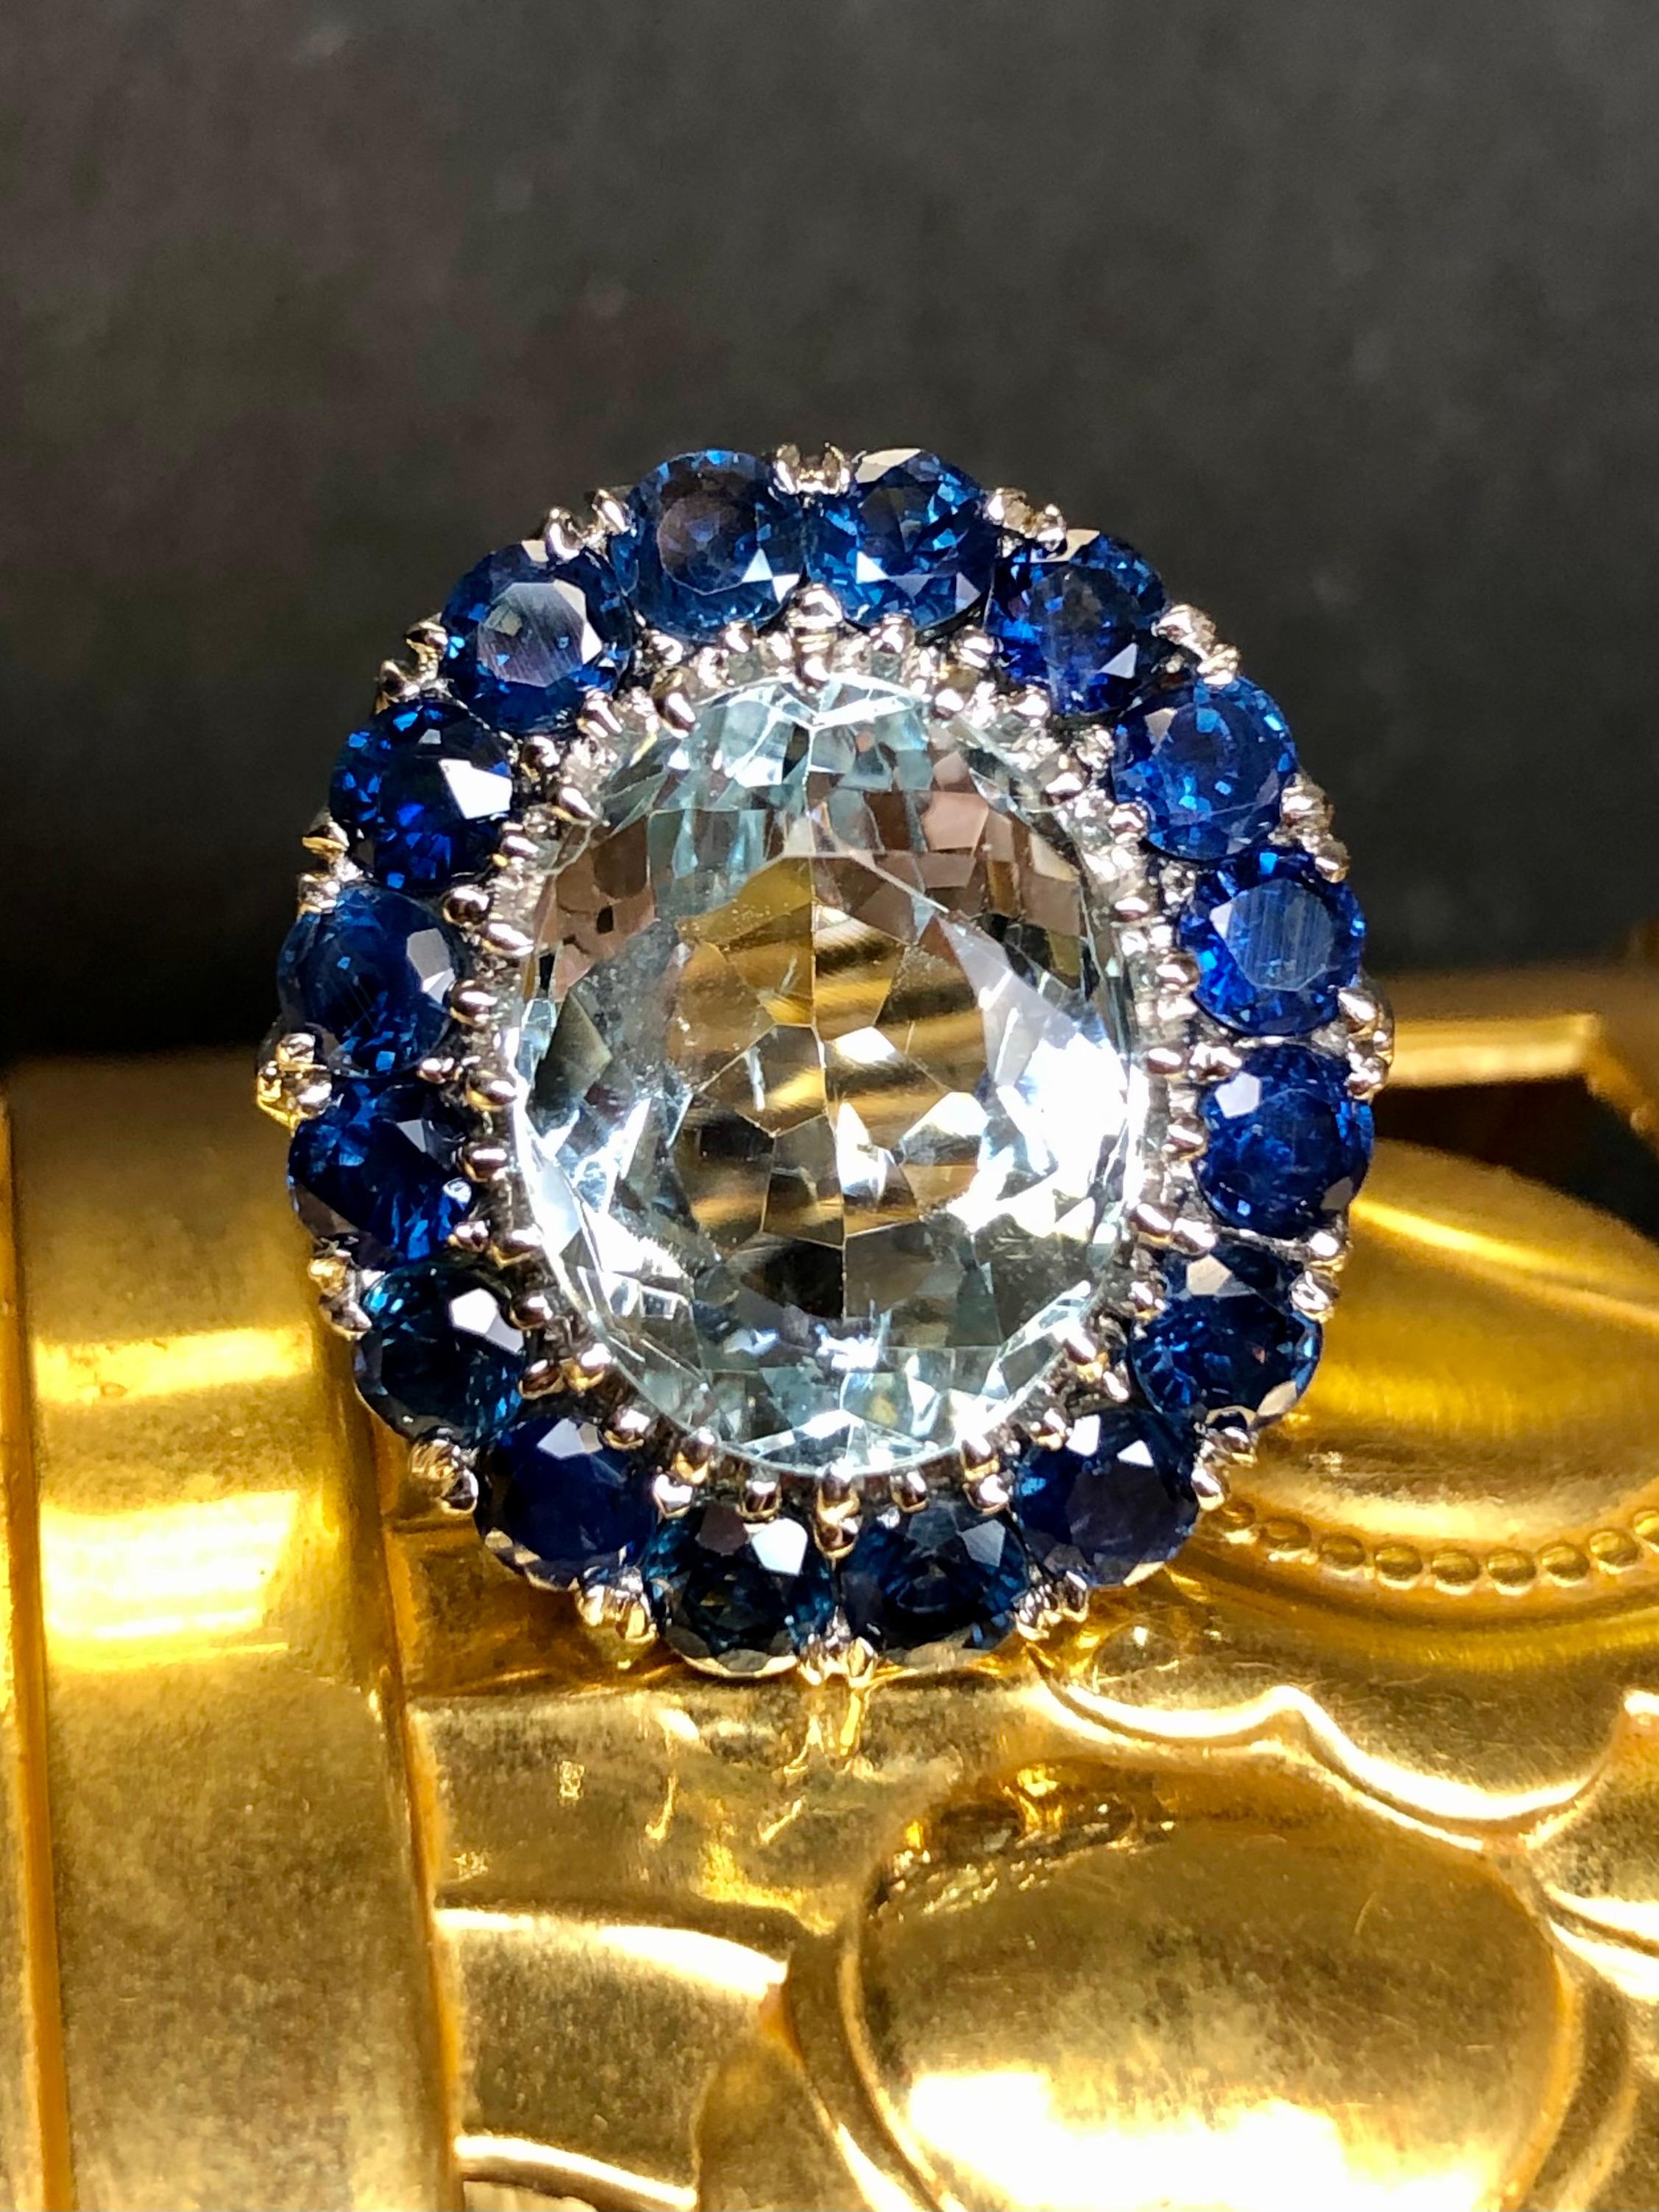 An absolutely stunning cocktail ring done in 14K white gold centered by an approximately 6ct natural oval aquamarine surrounded by approximately 3.50cttw in large and bright natural royal blue sapphires. A beautifully crafted piece that would be a